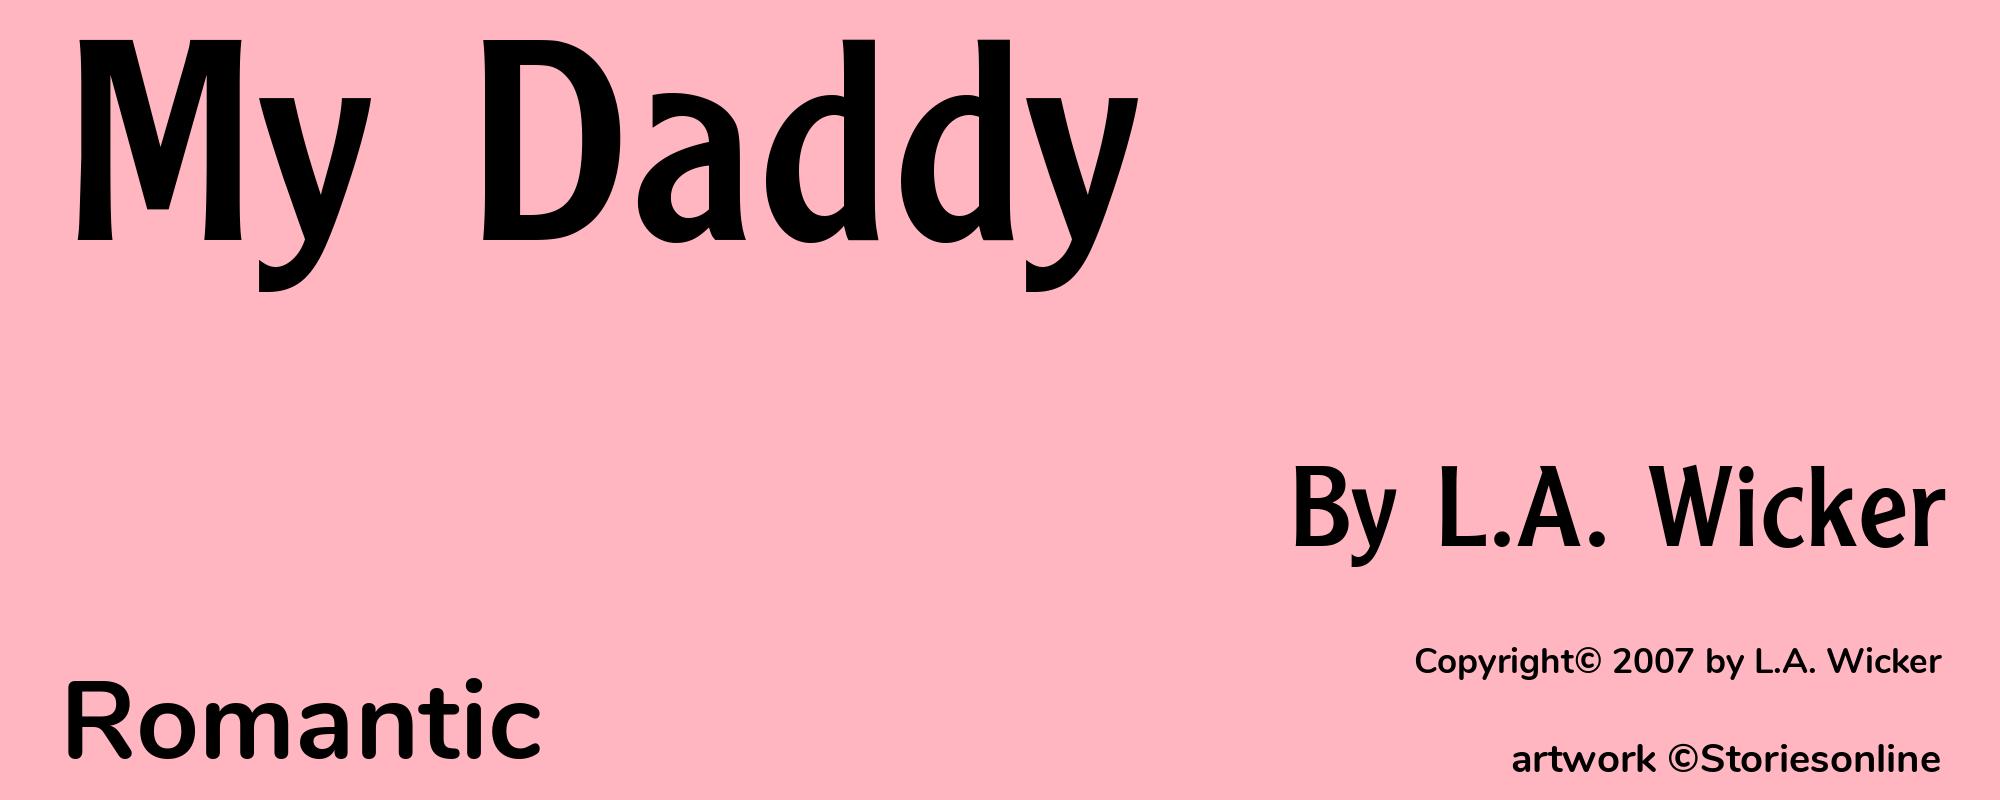 My Daddy - Cover